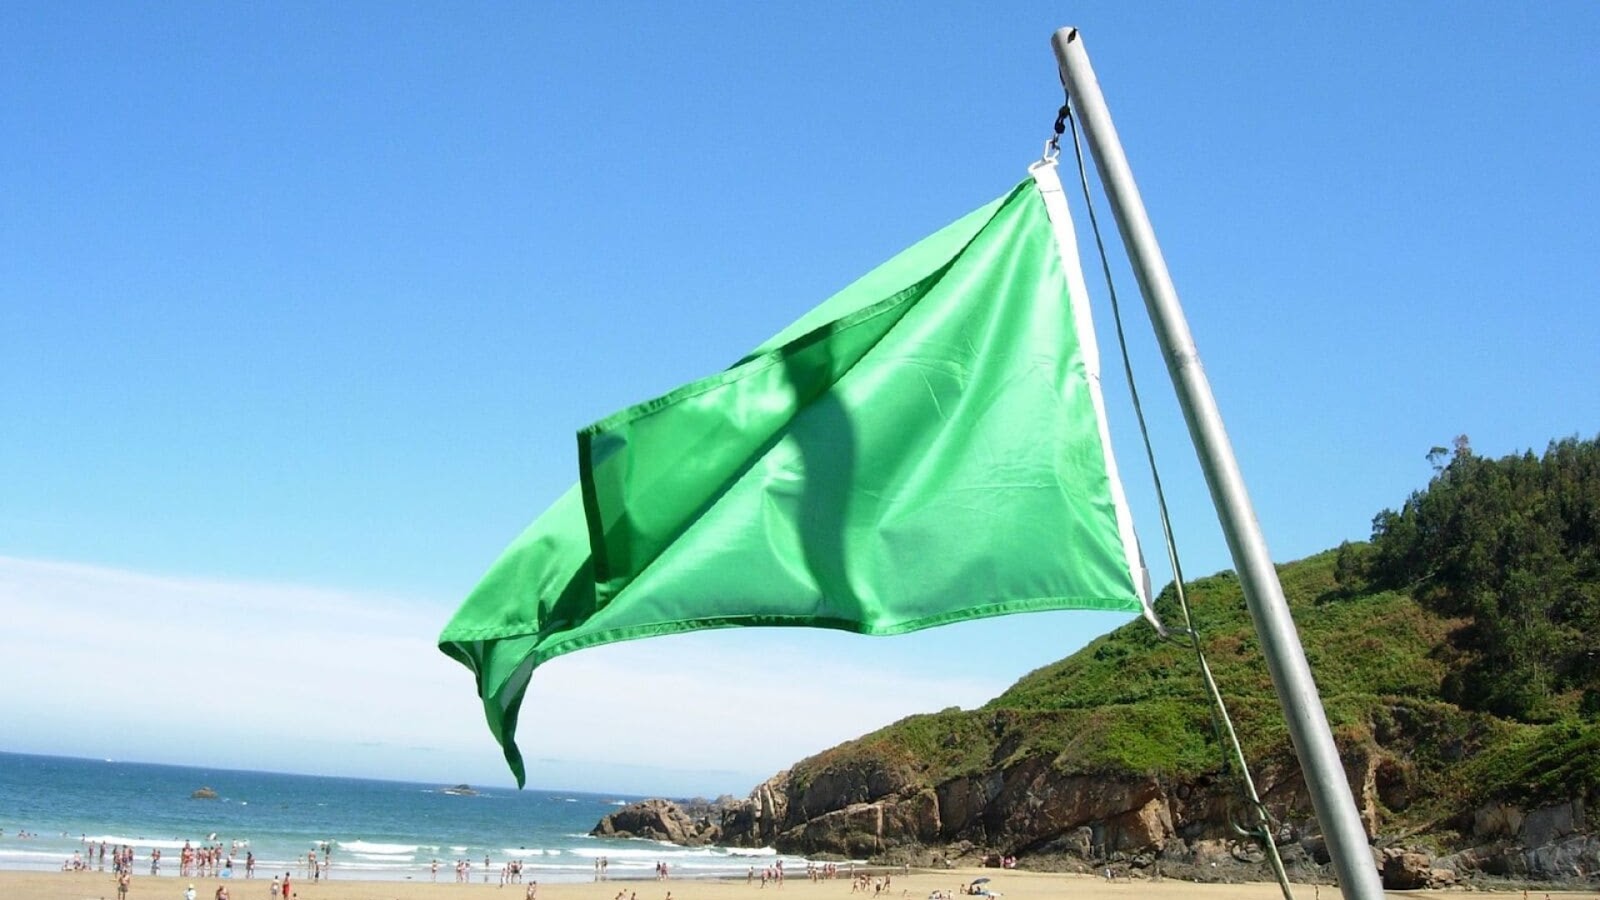 An image of a green safety beach flag